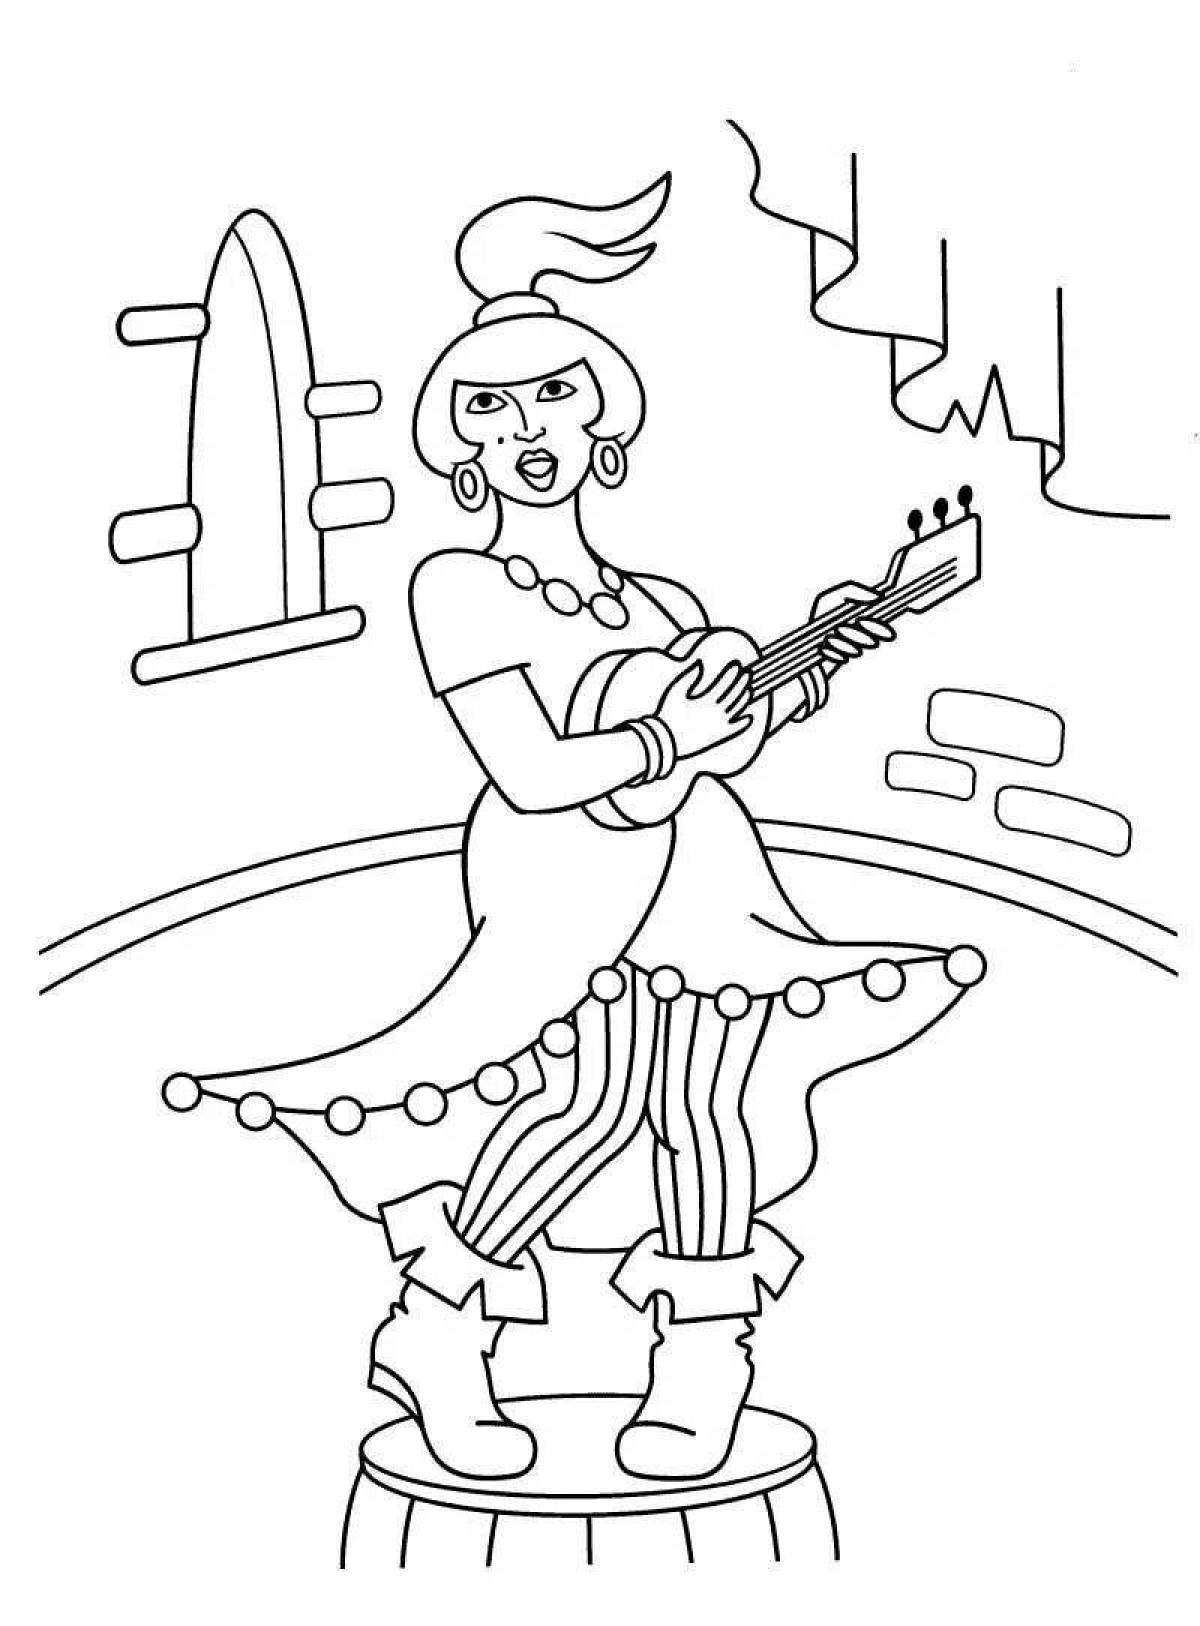 Coloring book the mesmerizing town musicians of Bremen